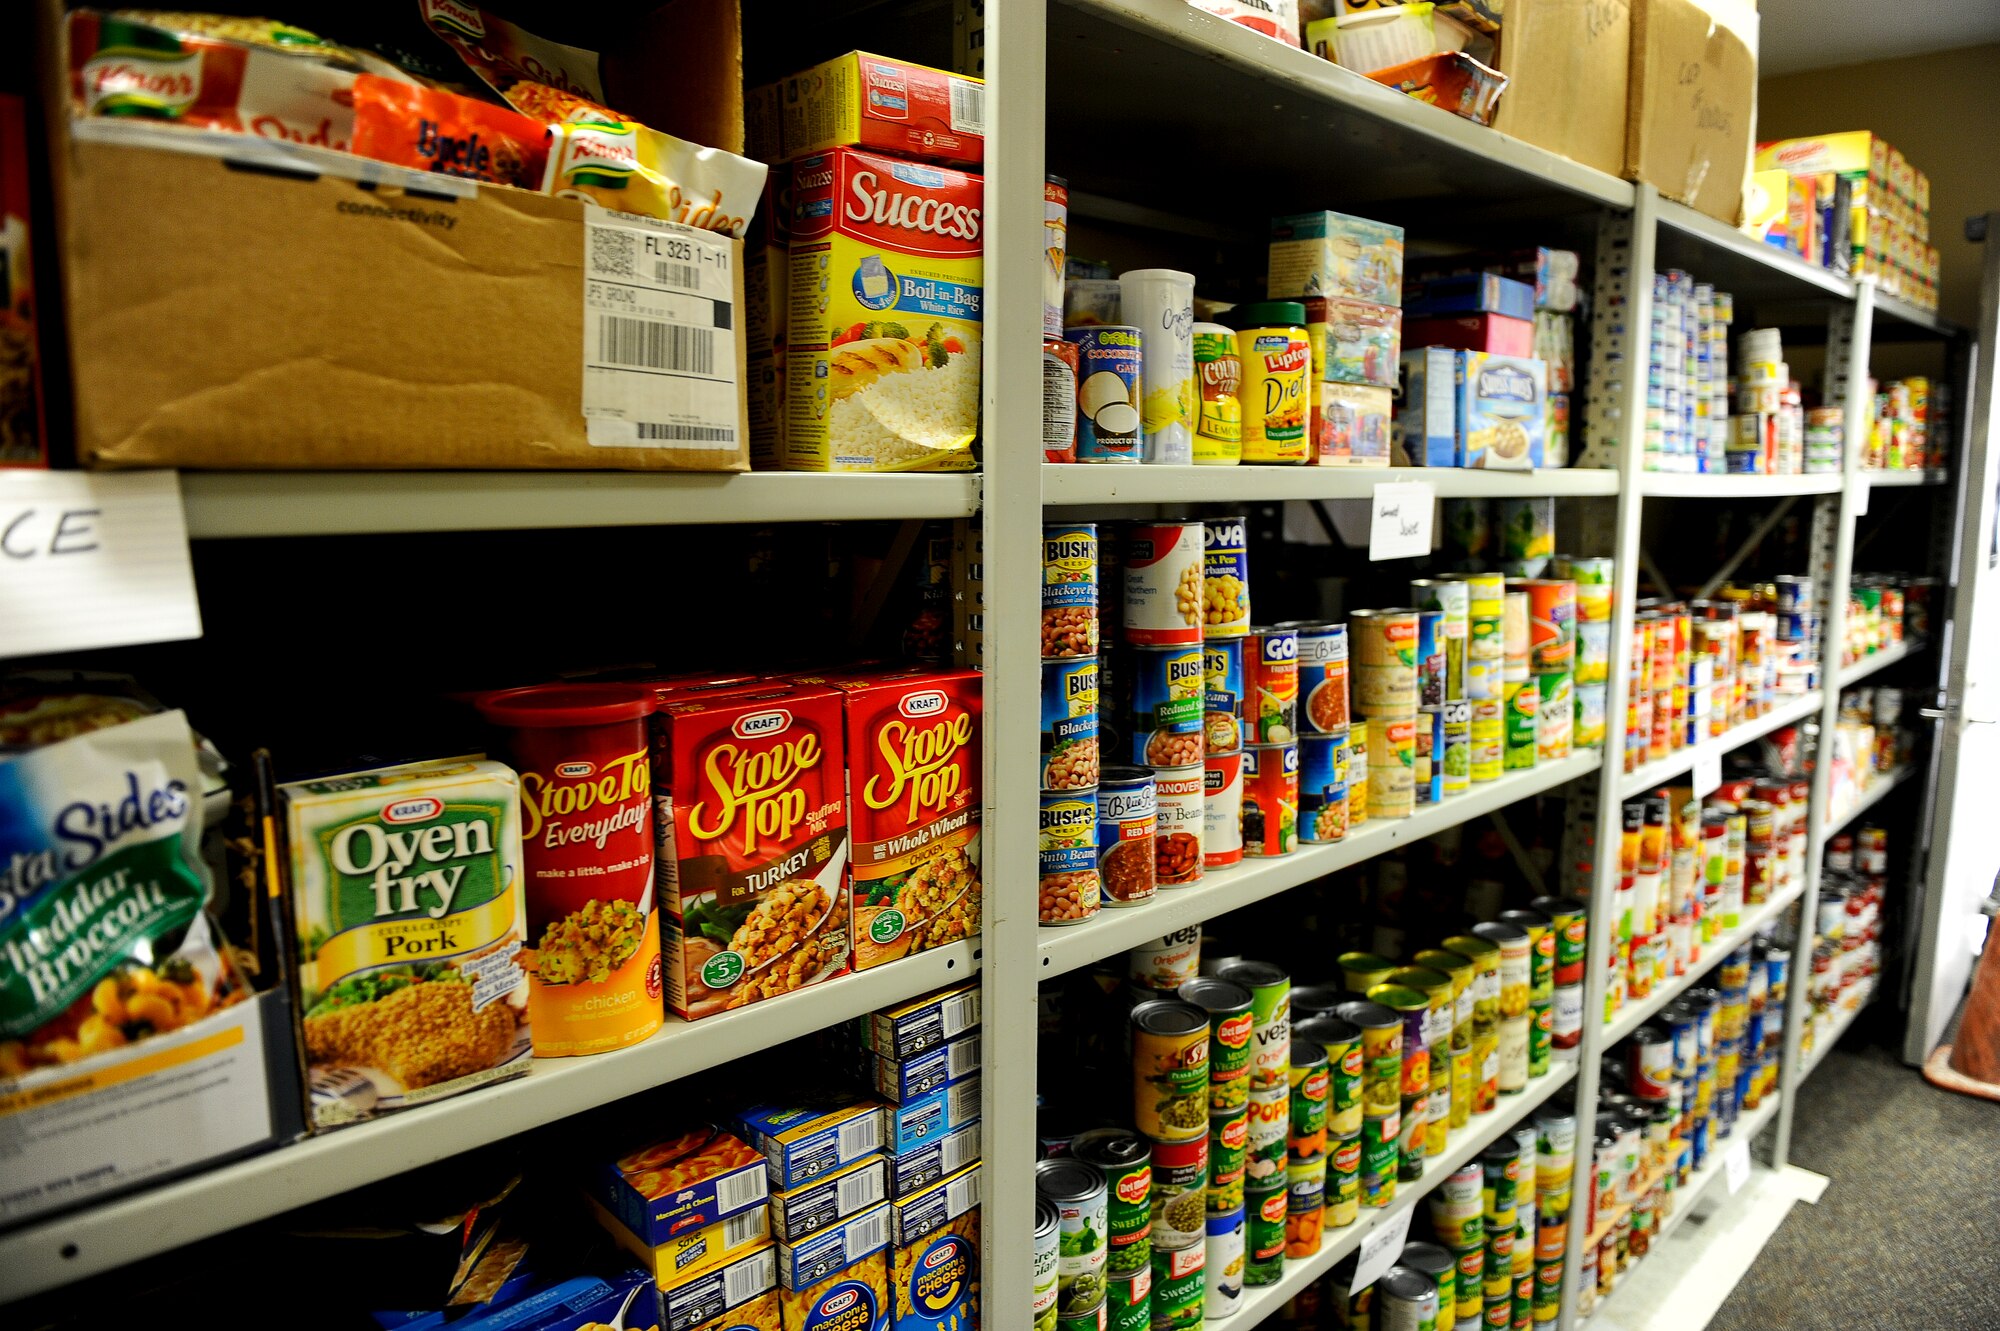 More than 3,000 pounds of non-perishable food sits on the shelves of the base food pantry located in the same building as the Airman’s Attic on Hurlburt Field, Fla., July 24, 2013. Anyone needing access to the food pantry should seek their first sergeants assistance. (U.S. Air Force photo by Airman 1st Class Jeffrey Parkinson)